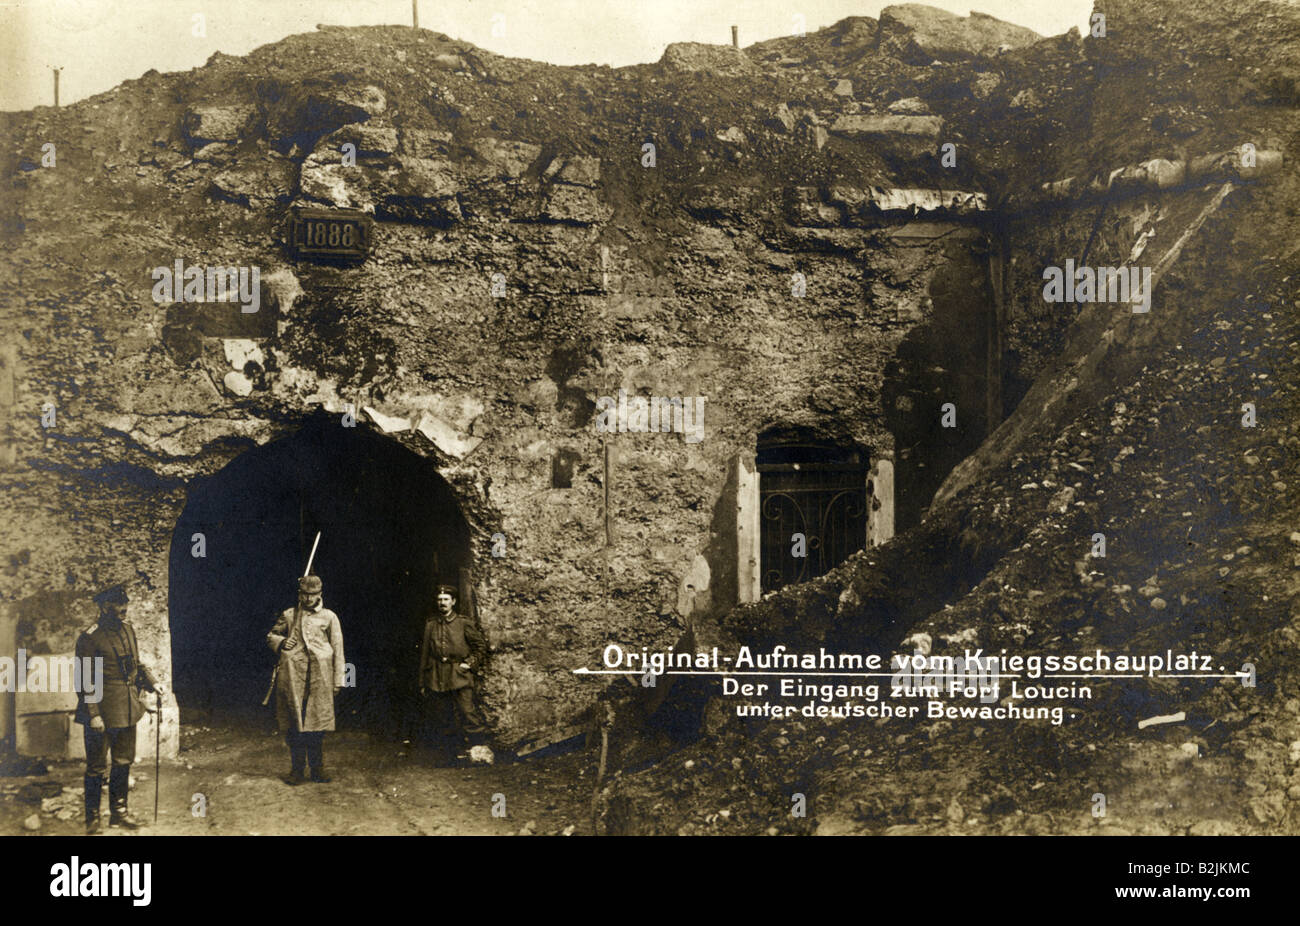 events, First World War / WWI, Western Front, Belgium, entrance of Fort Loucin, Liege, photo postcard, 1914 / 1915, Stock Photo